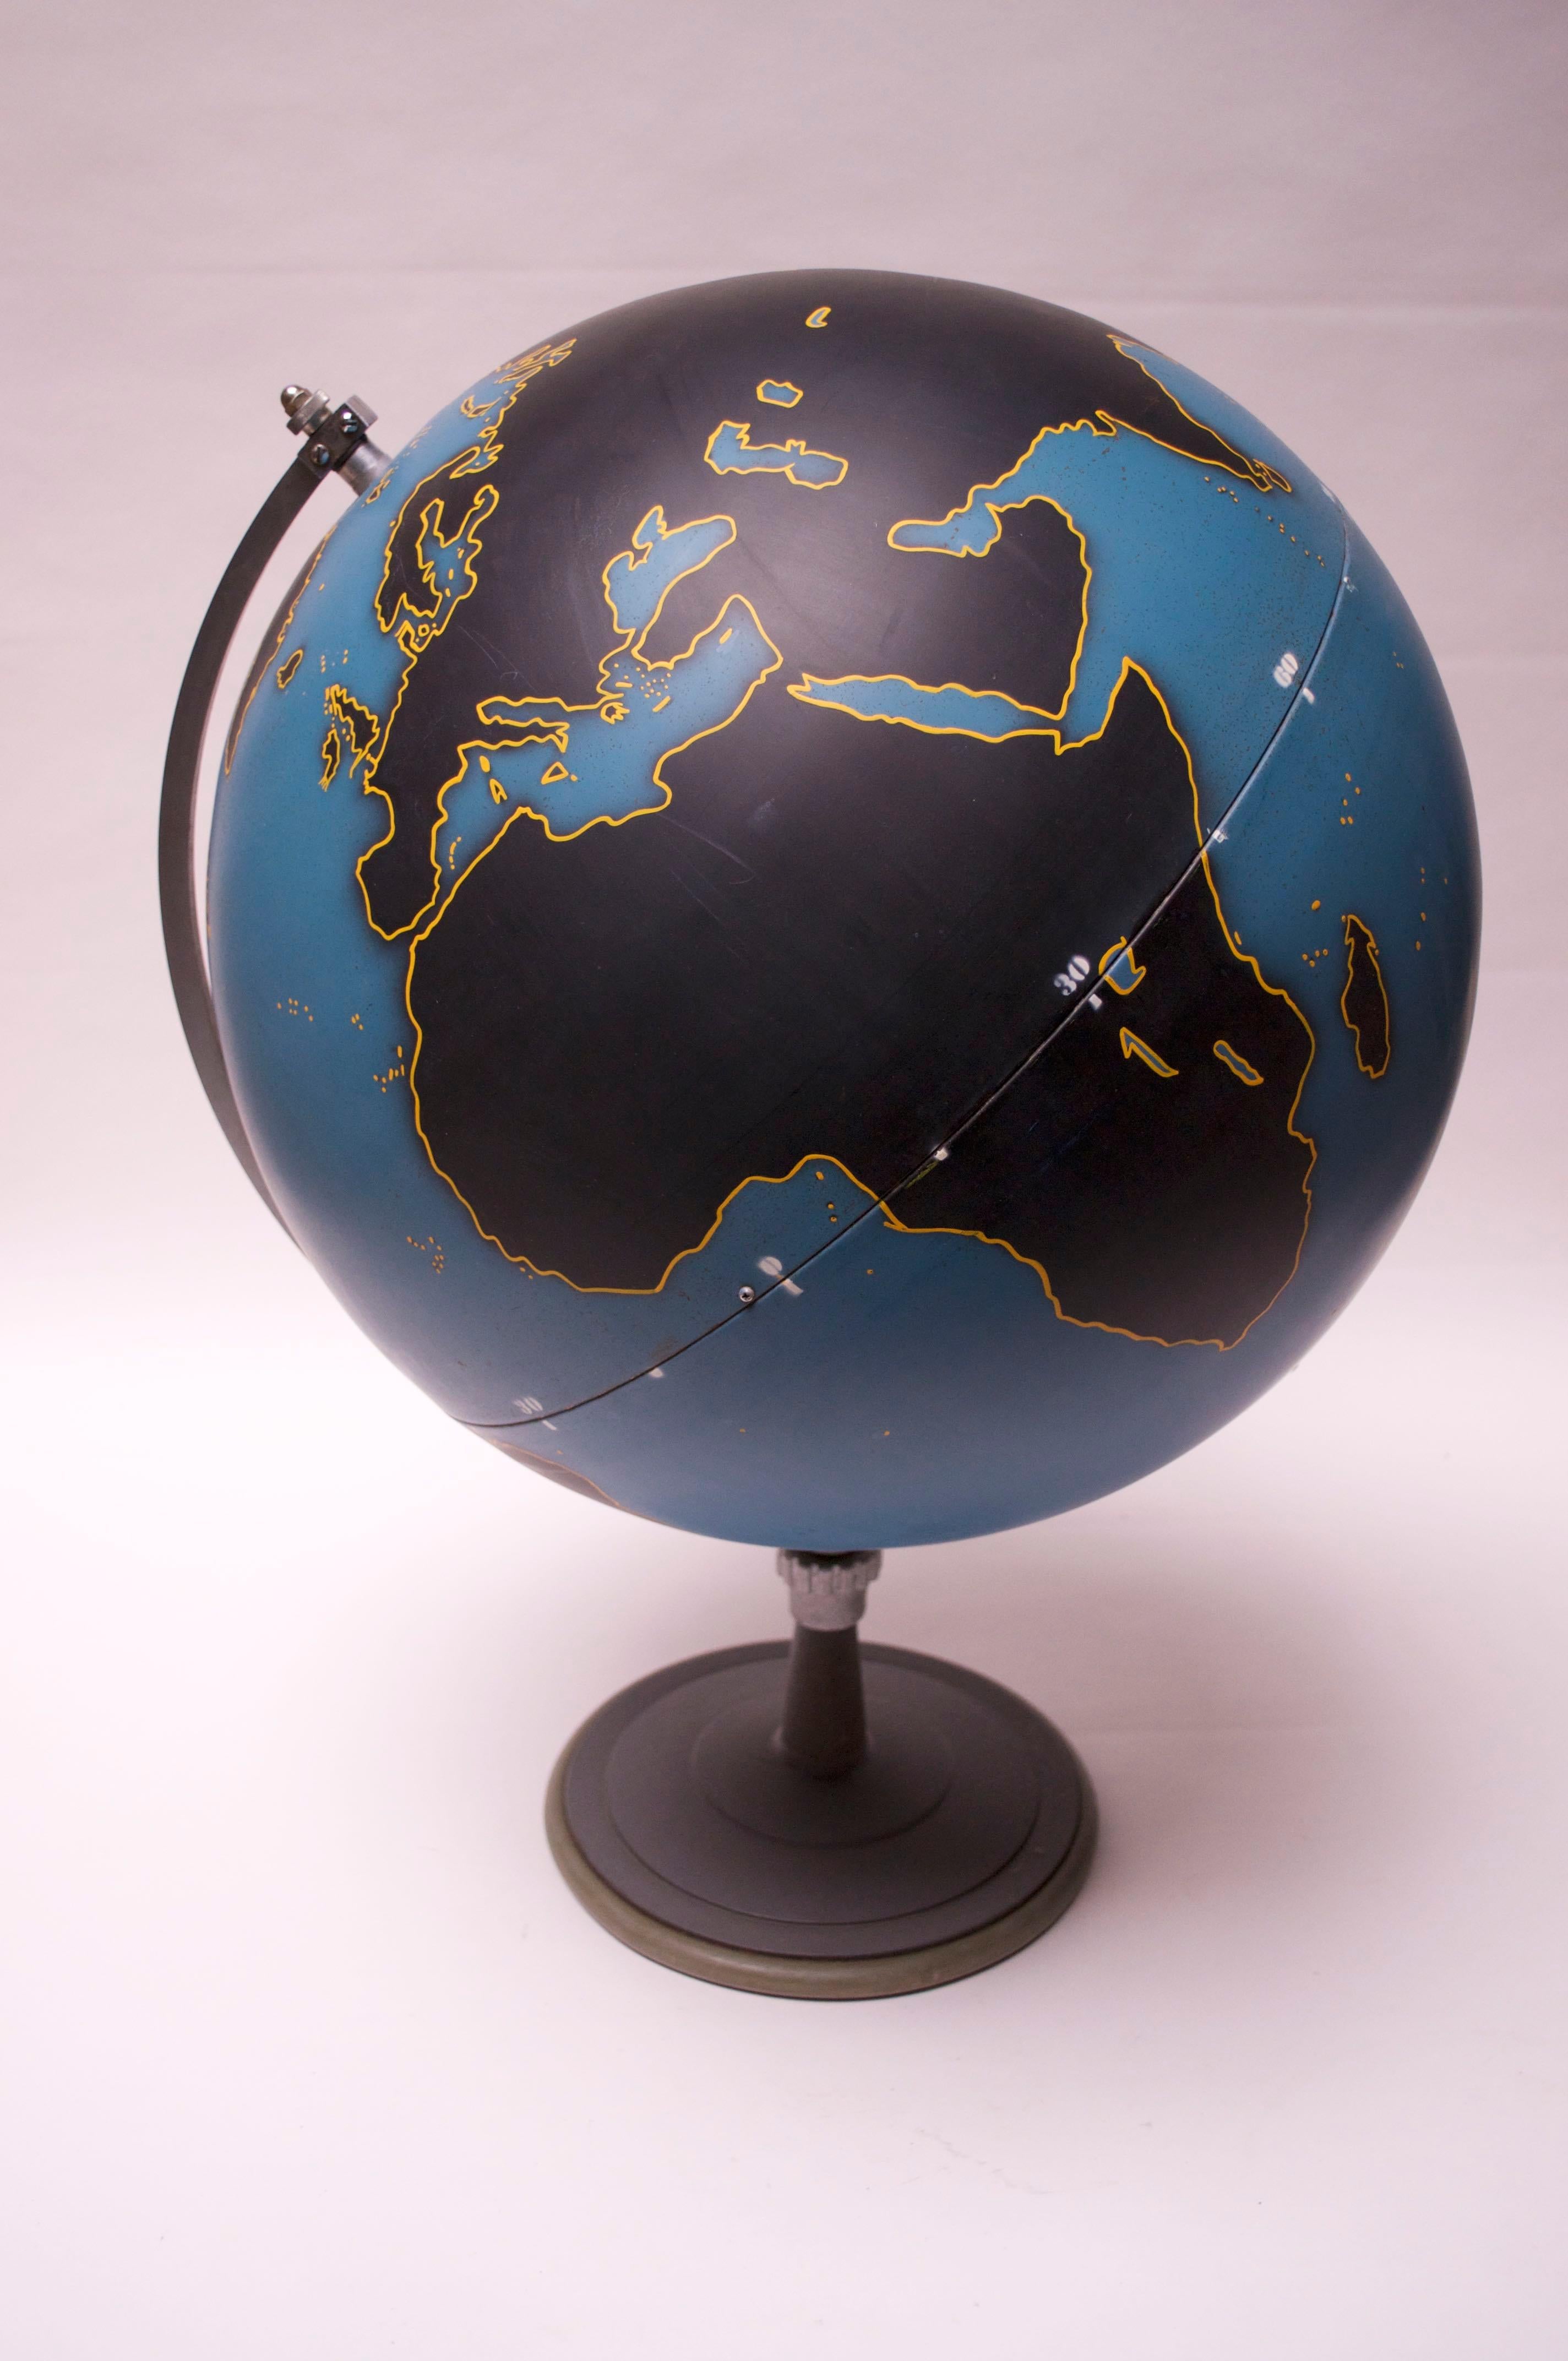 Machine Age-style Denoyer Geppert of Chicago Military or Activity Globe composed of a spun metal blue orb with black slated land masses outlined in yellow. These globes were used by the military and NASA, in addition to serving as geographical